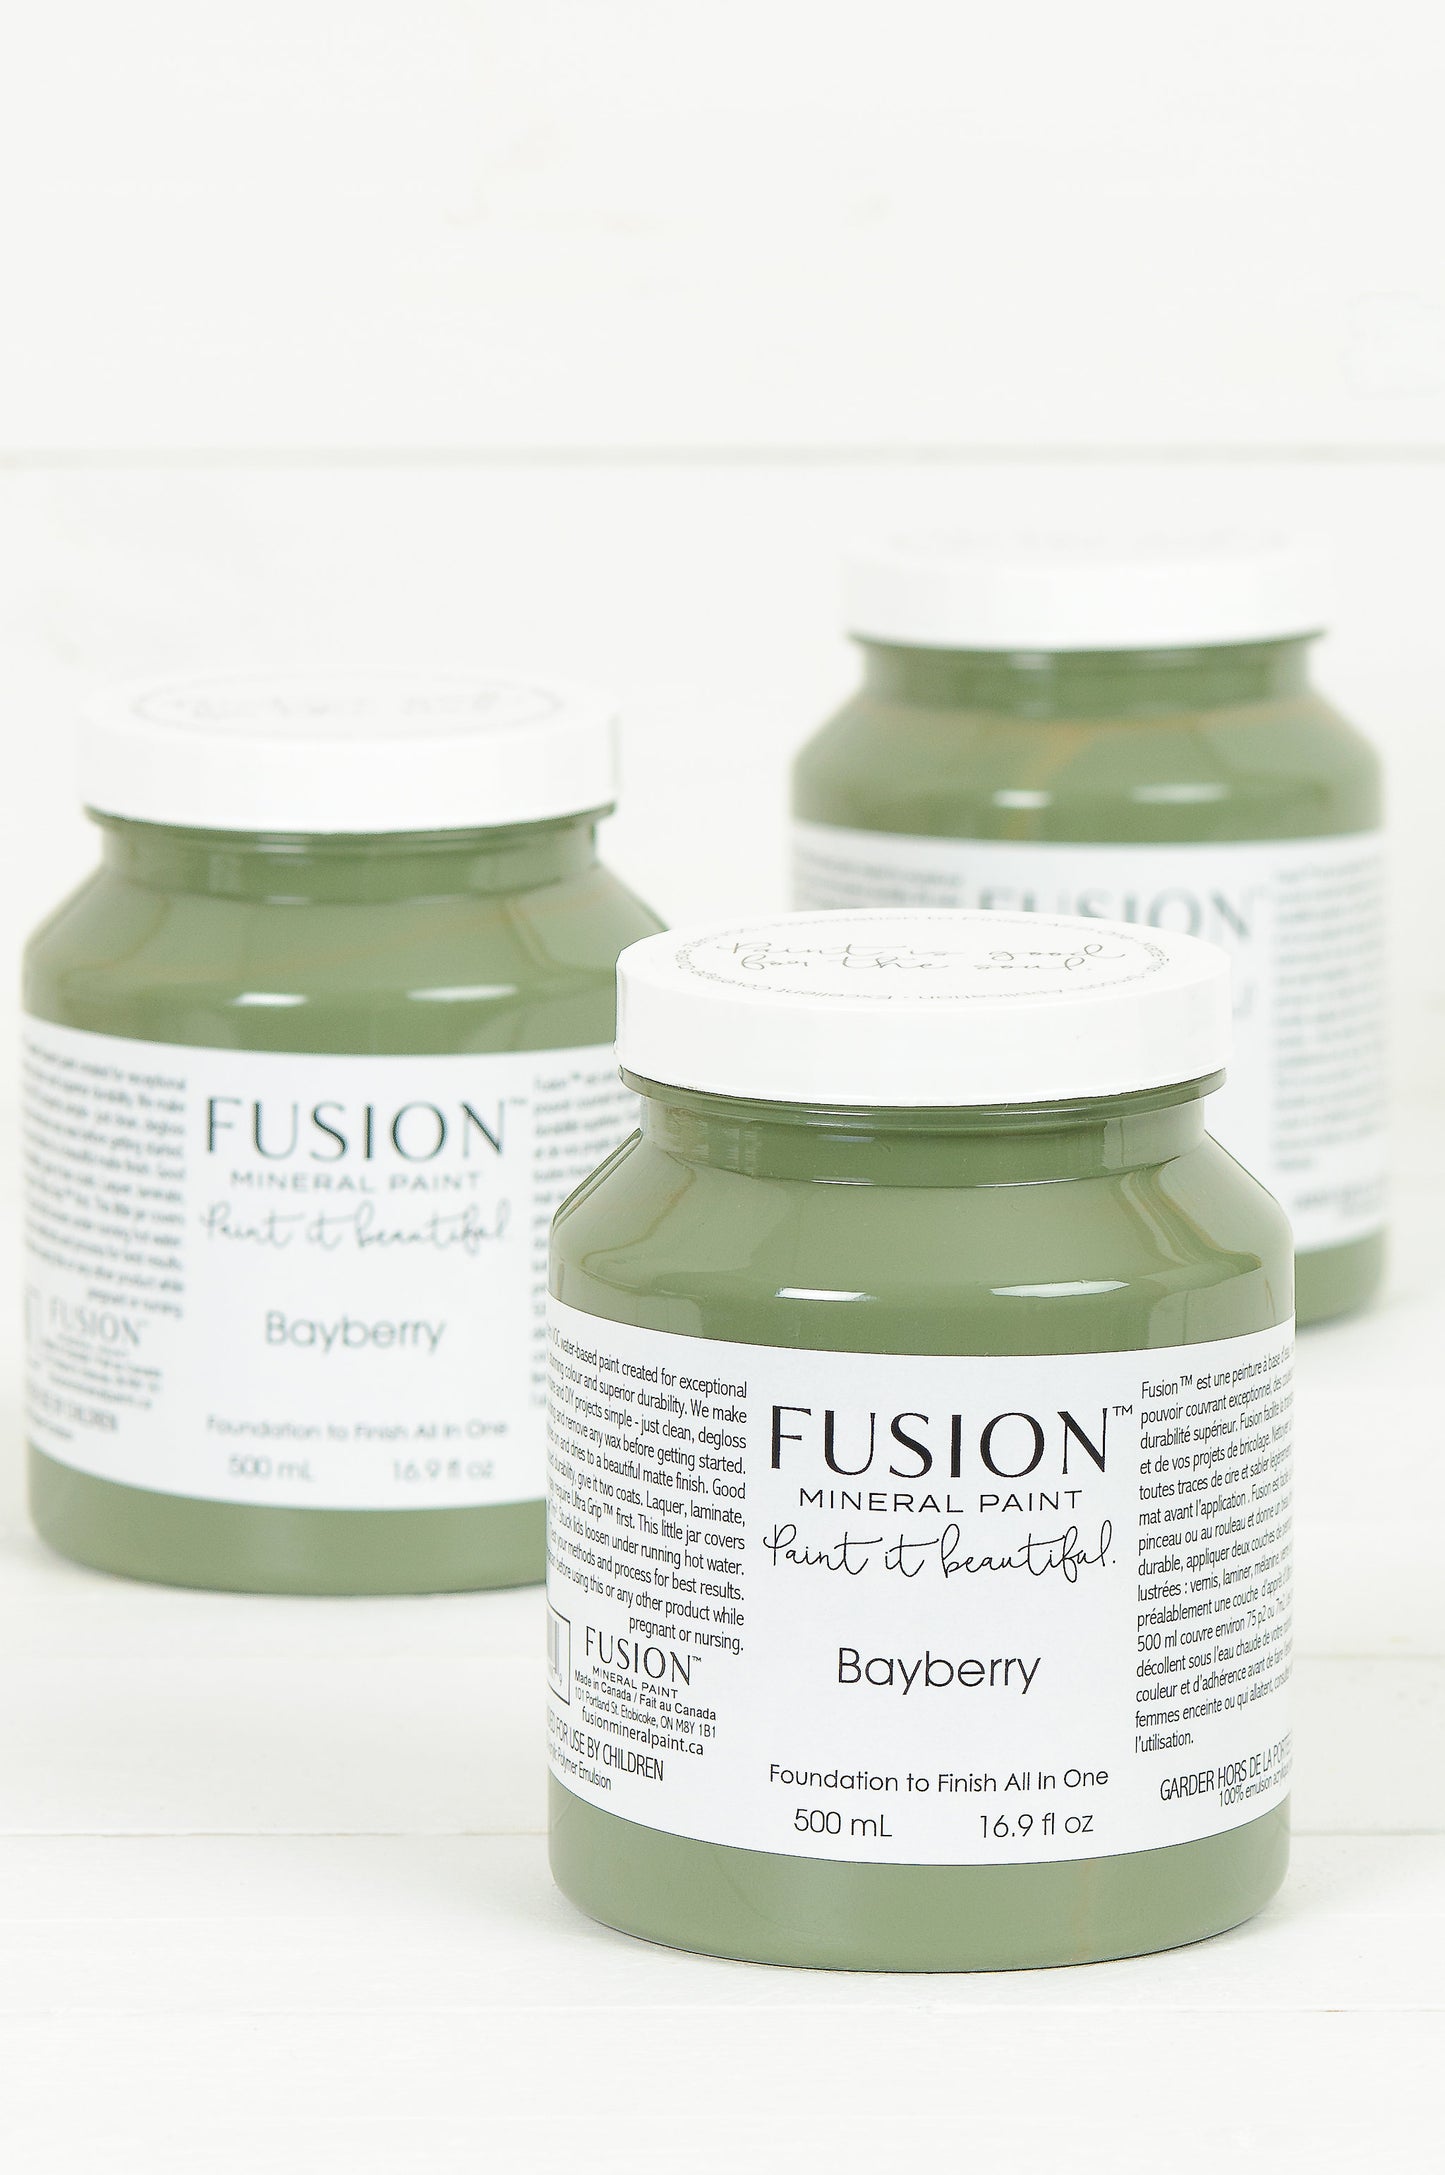 Bayberry by Fusion